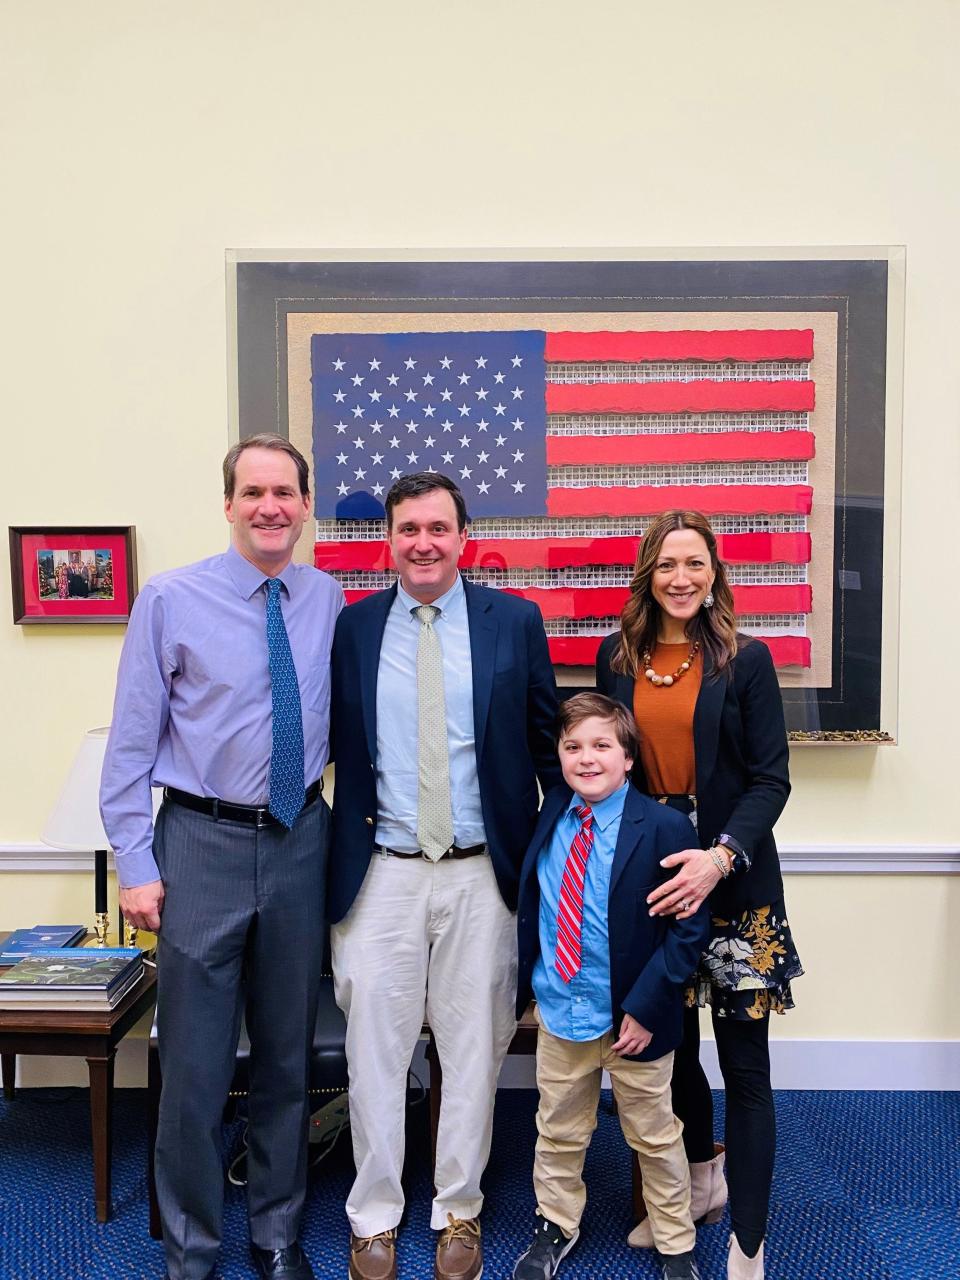 The Currans, pictured here with Congressman Jim Himes of Connecticut, lobby on behalf of the Muscular Dystrophy Association